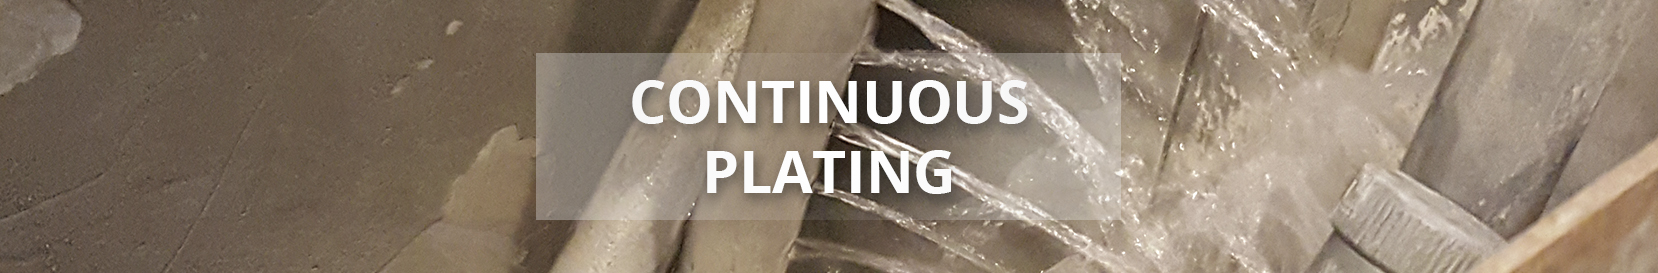 Precision Process - continuous Plating - Material Handling